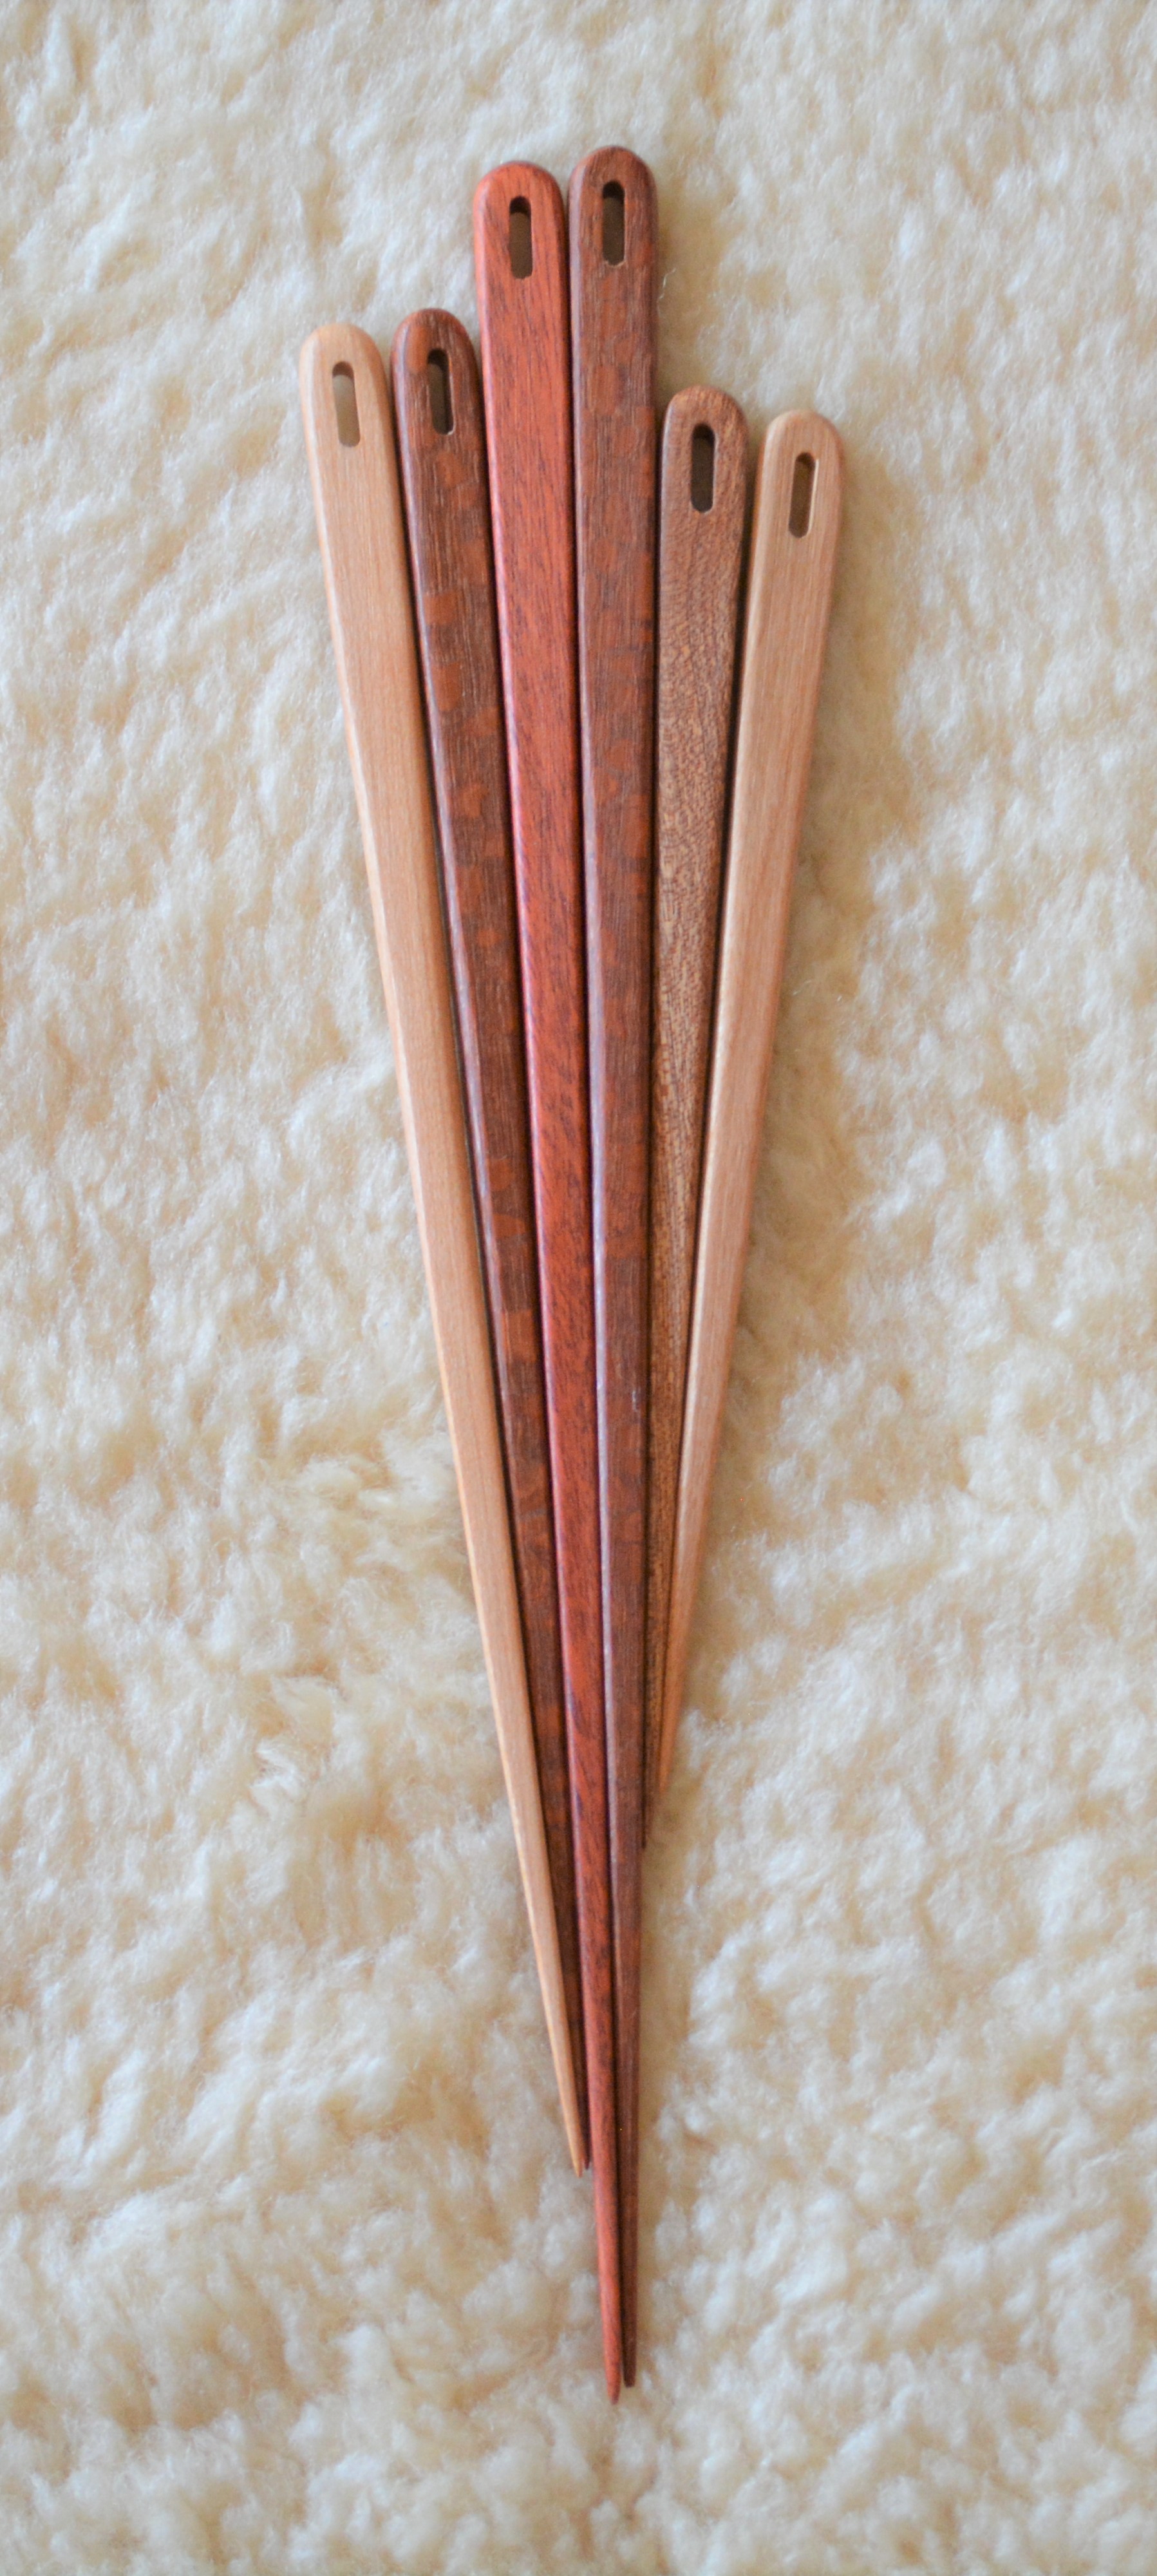 Wood Tapestry Weaving Needle – Needle + Purl